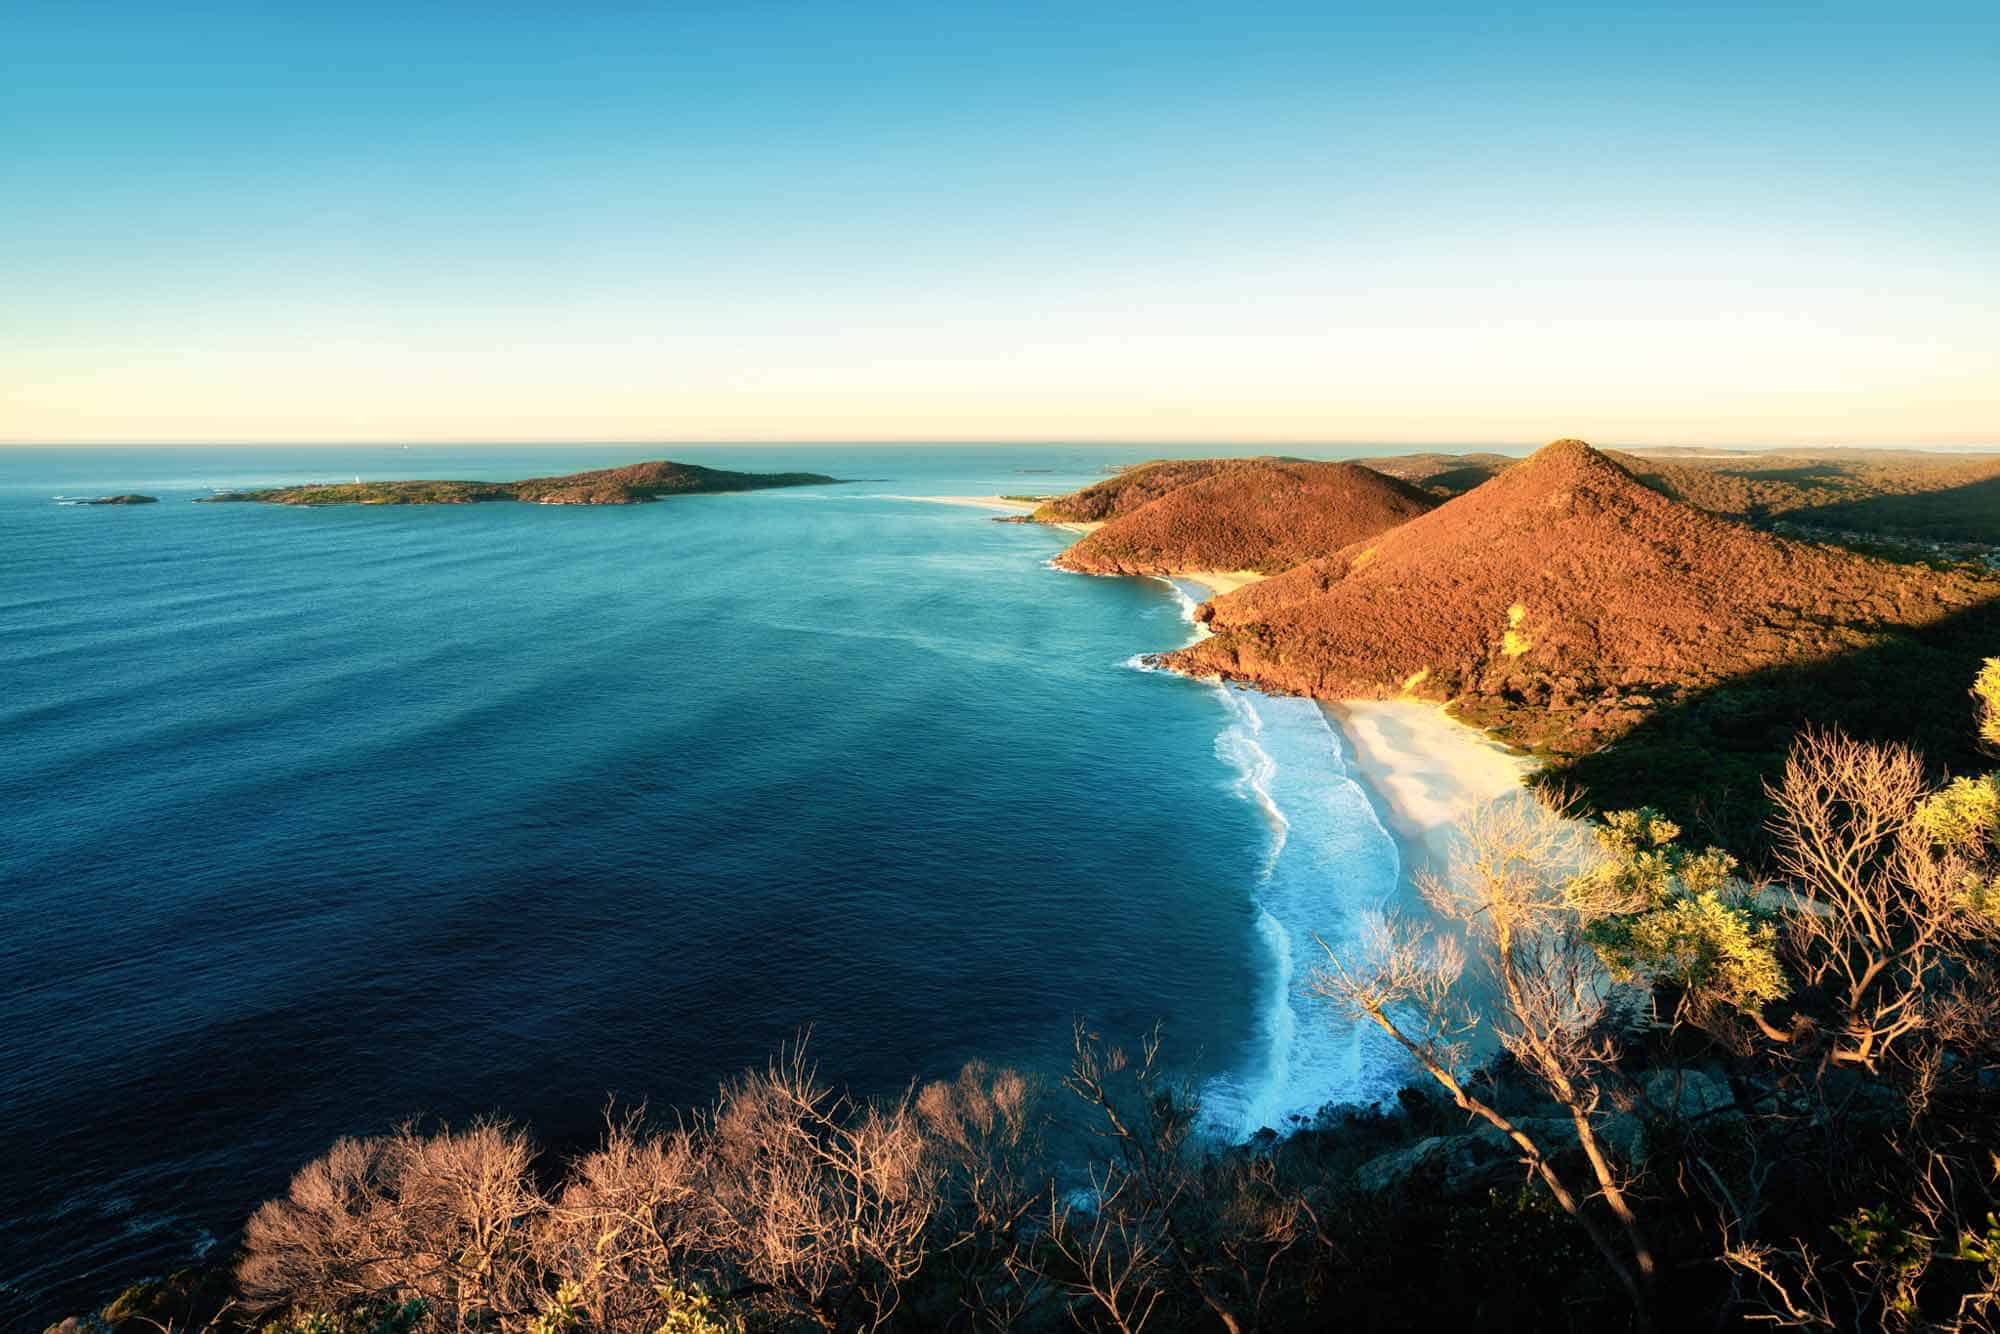 Things To Do In Port Stephens